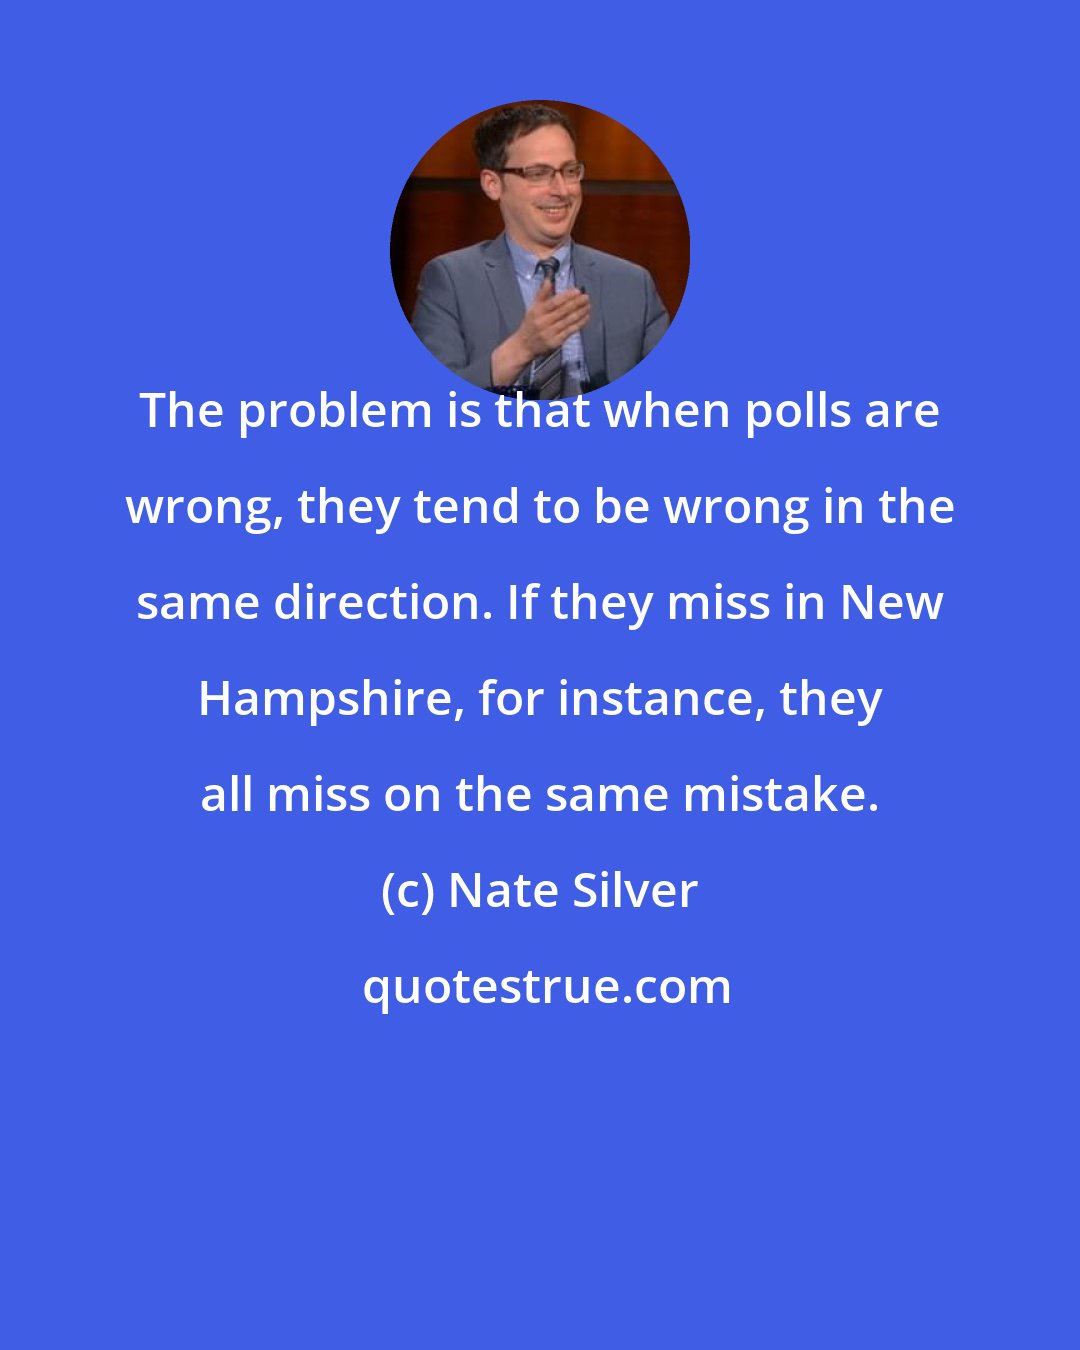 Nate Silver: The problem is that when polls are wrong, they tend to be wrong in the same direction. If they miss in New Hampshire, for instance, they all miss on the same mistake.